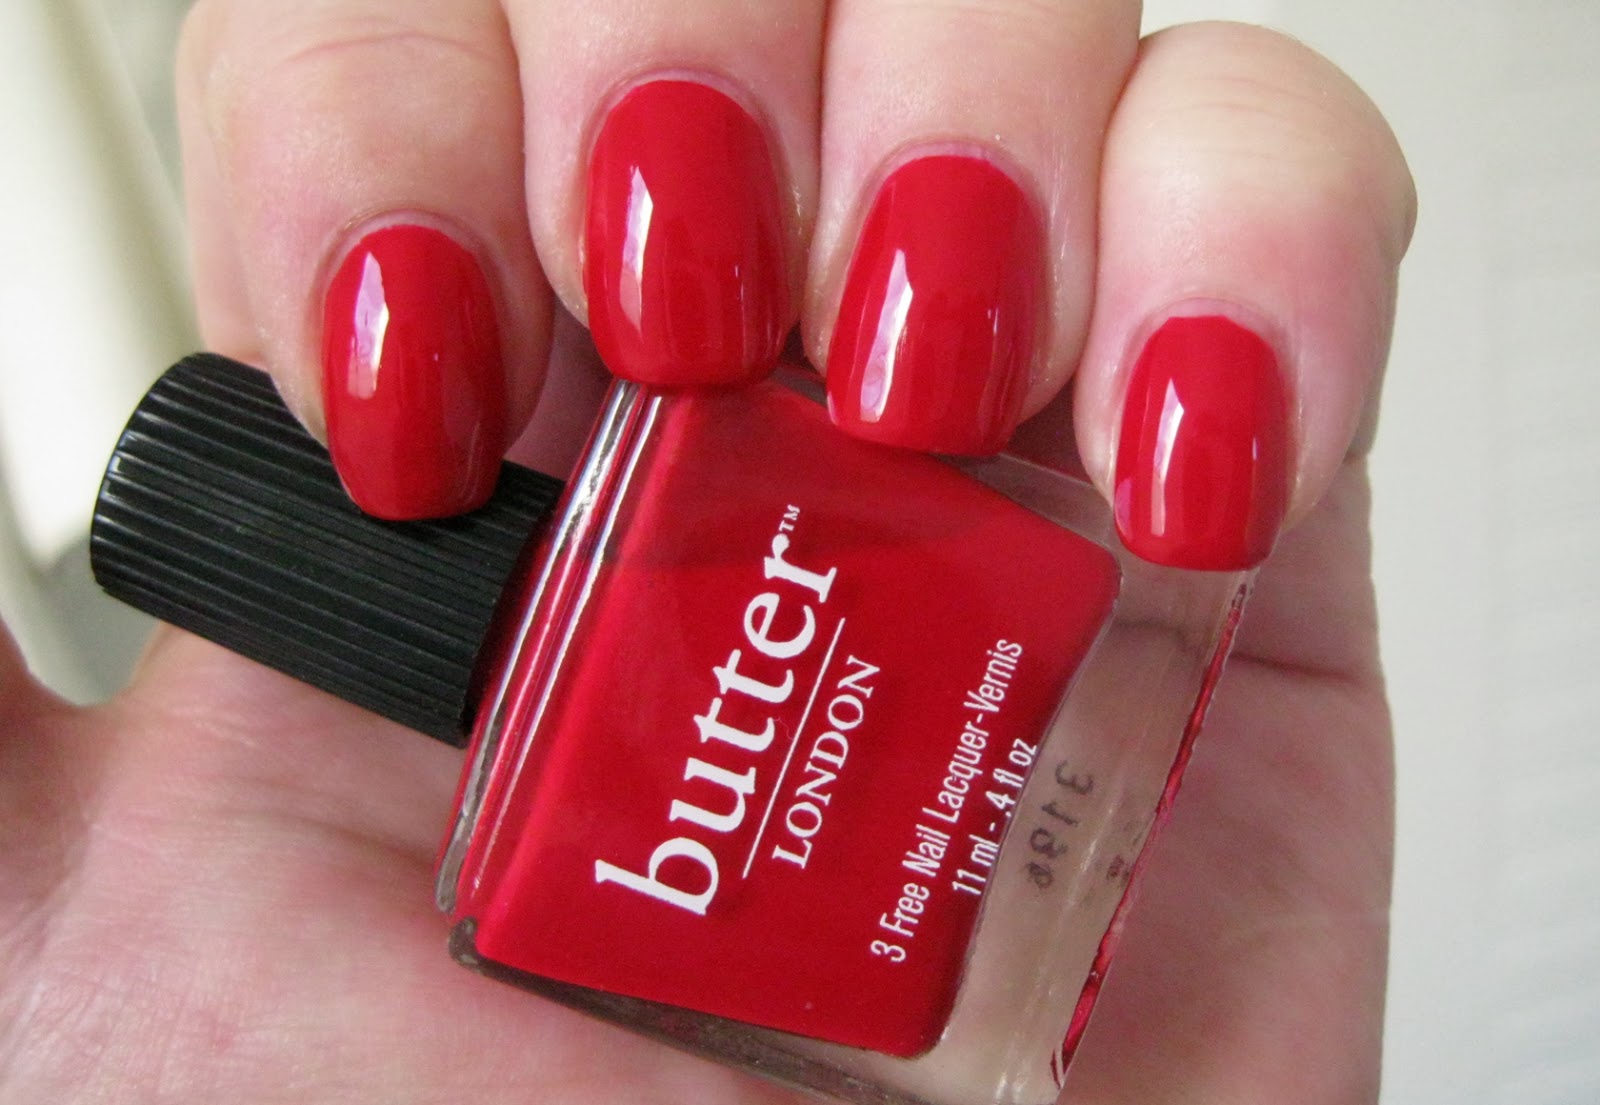 5. "Butter London Come to Bed Red" - wide 6